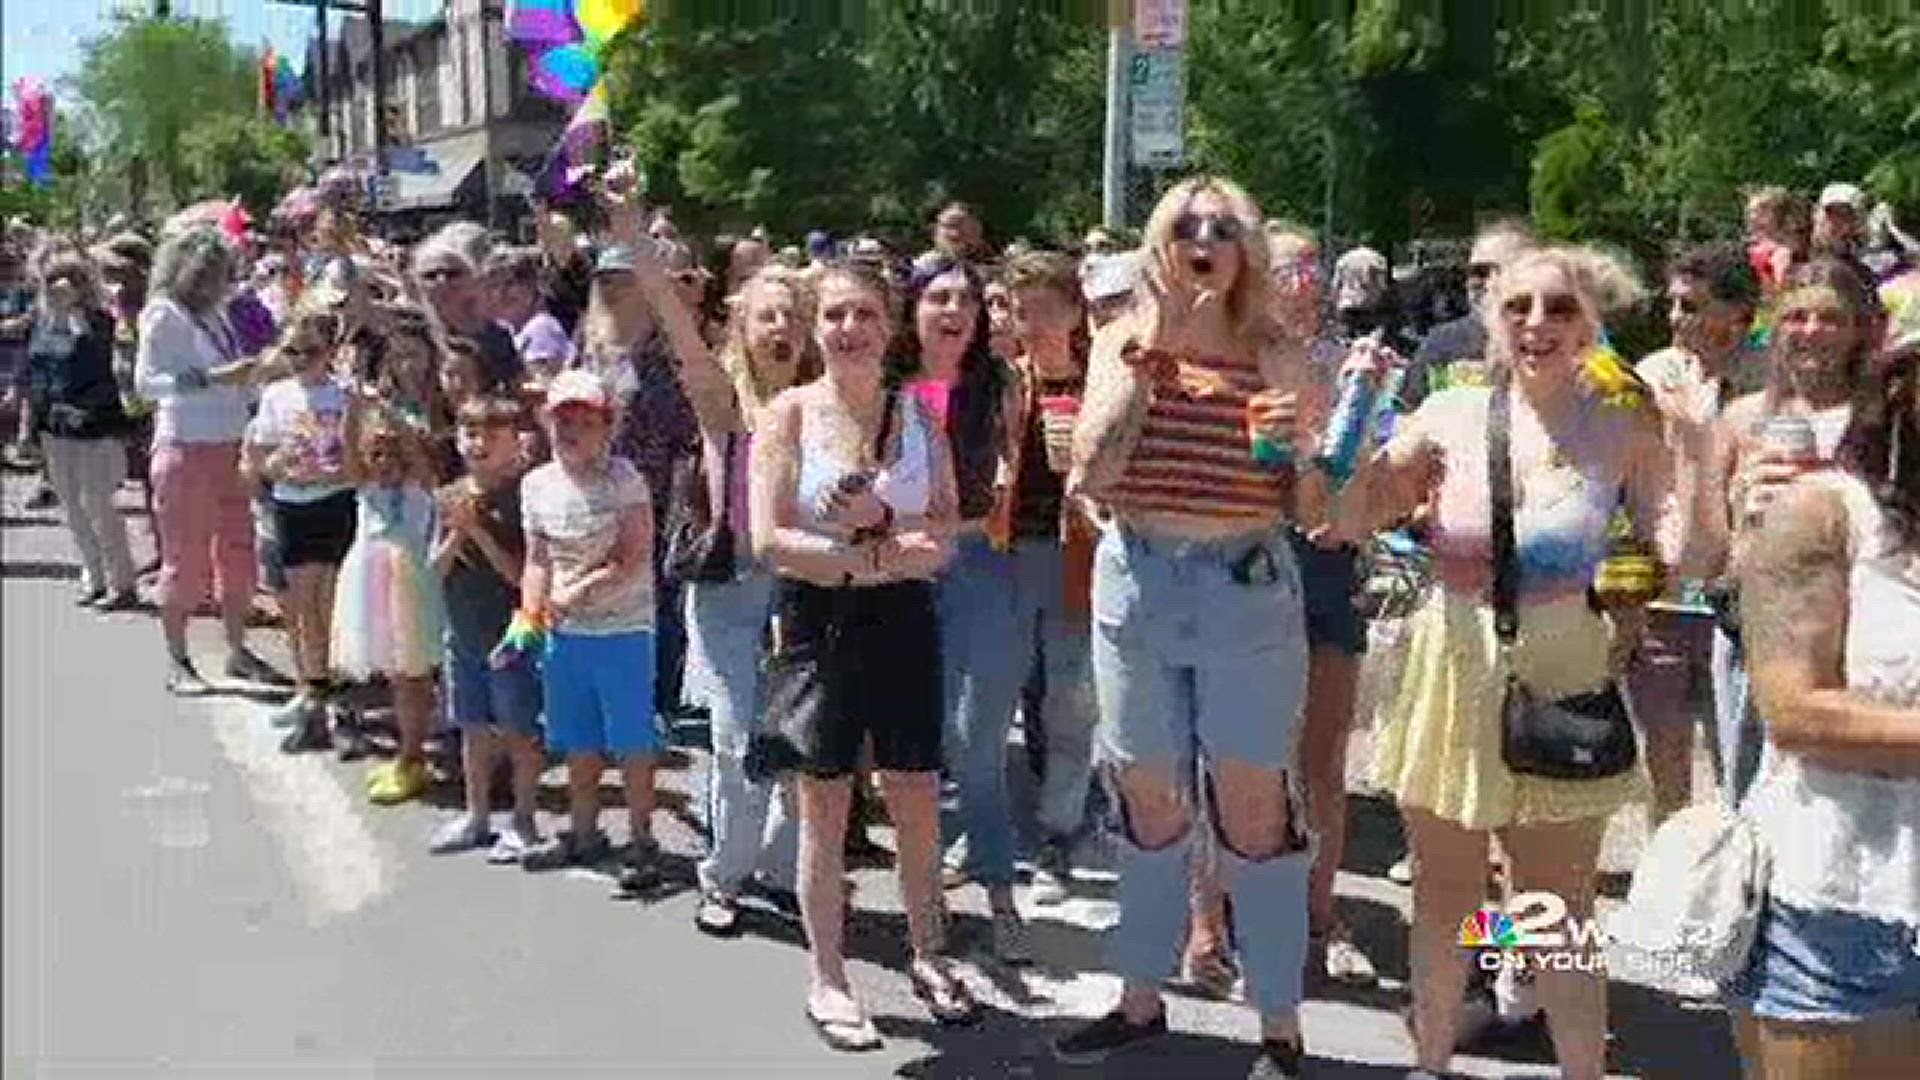 The Pride Parade marched down Elmwood Avenue on Sunday, June 5 in Buffalo.